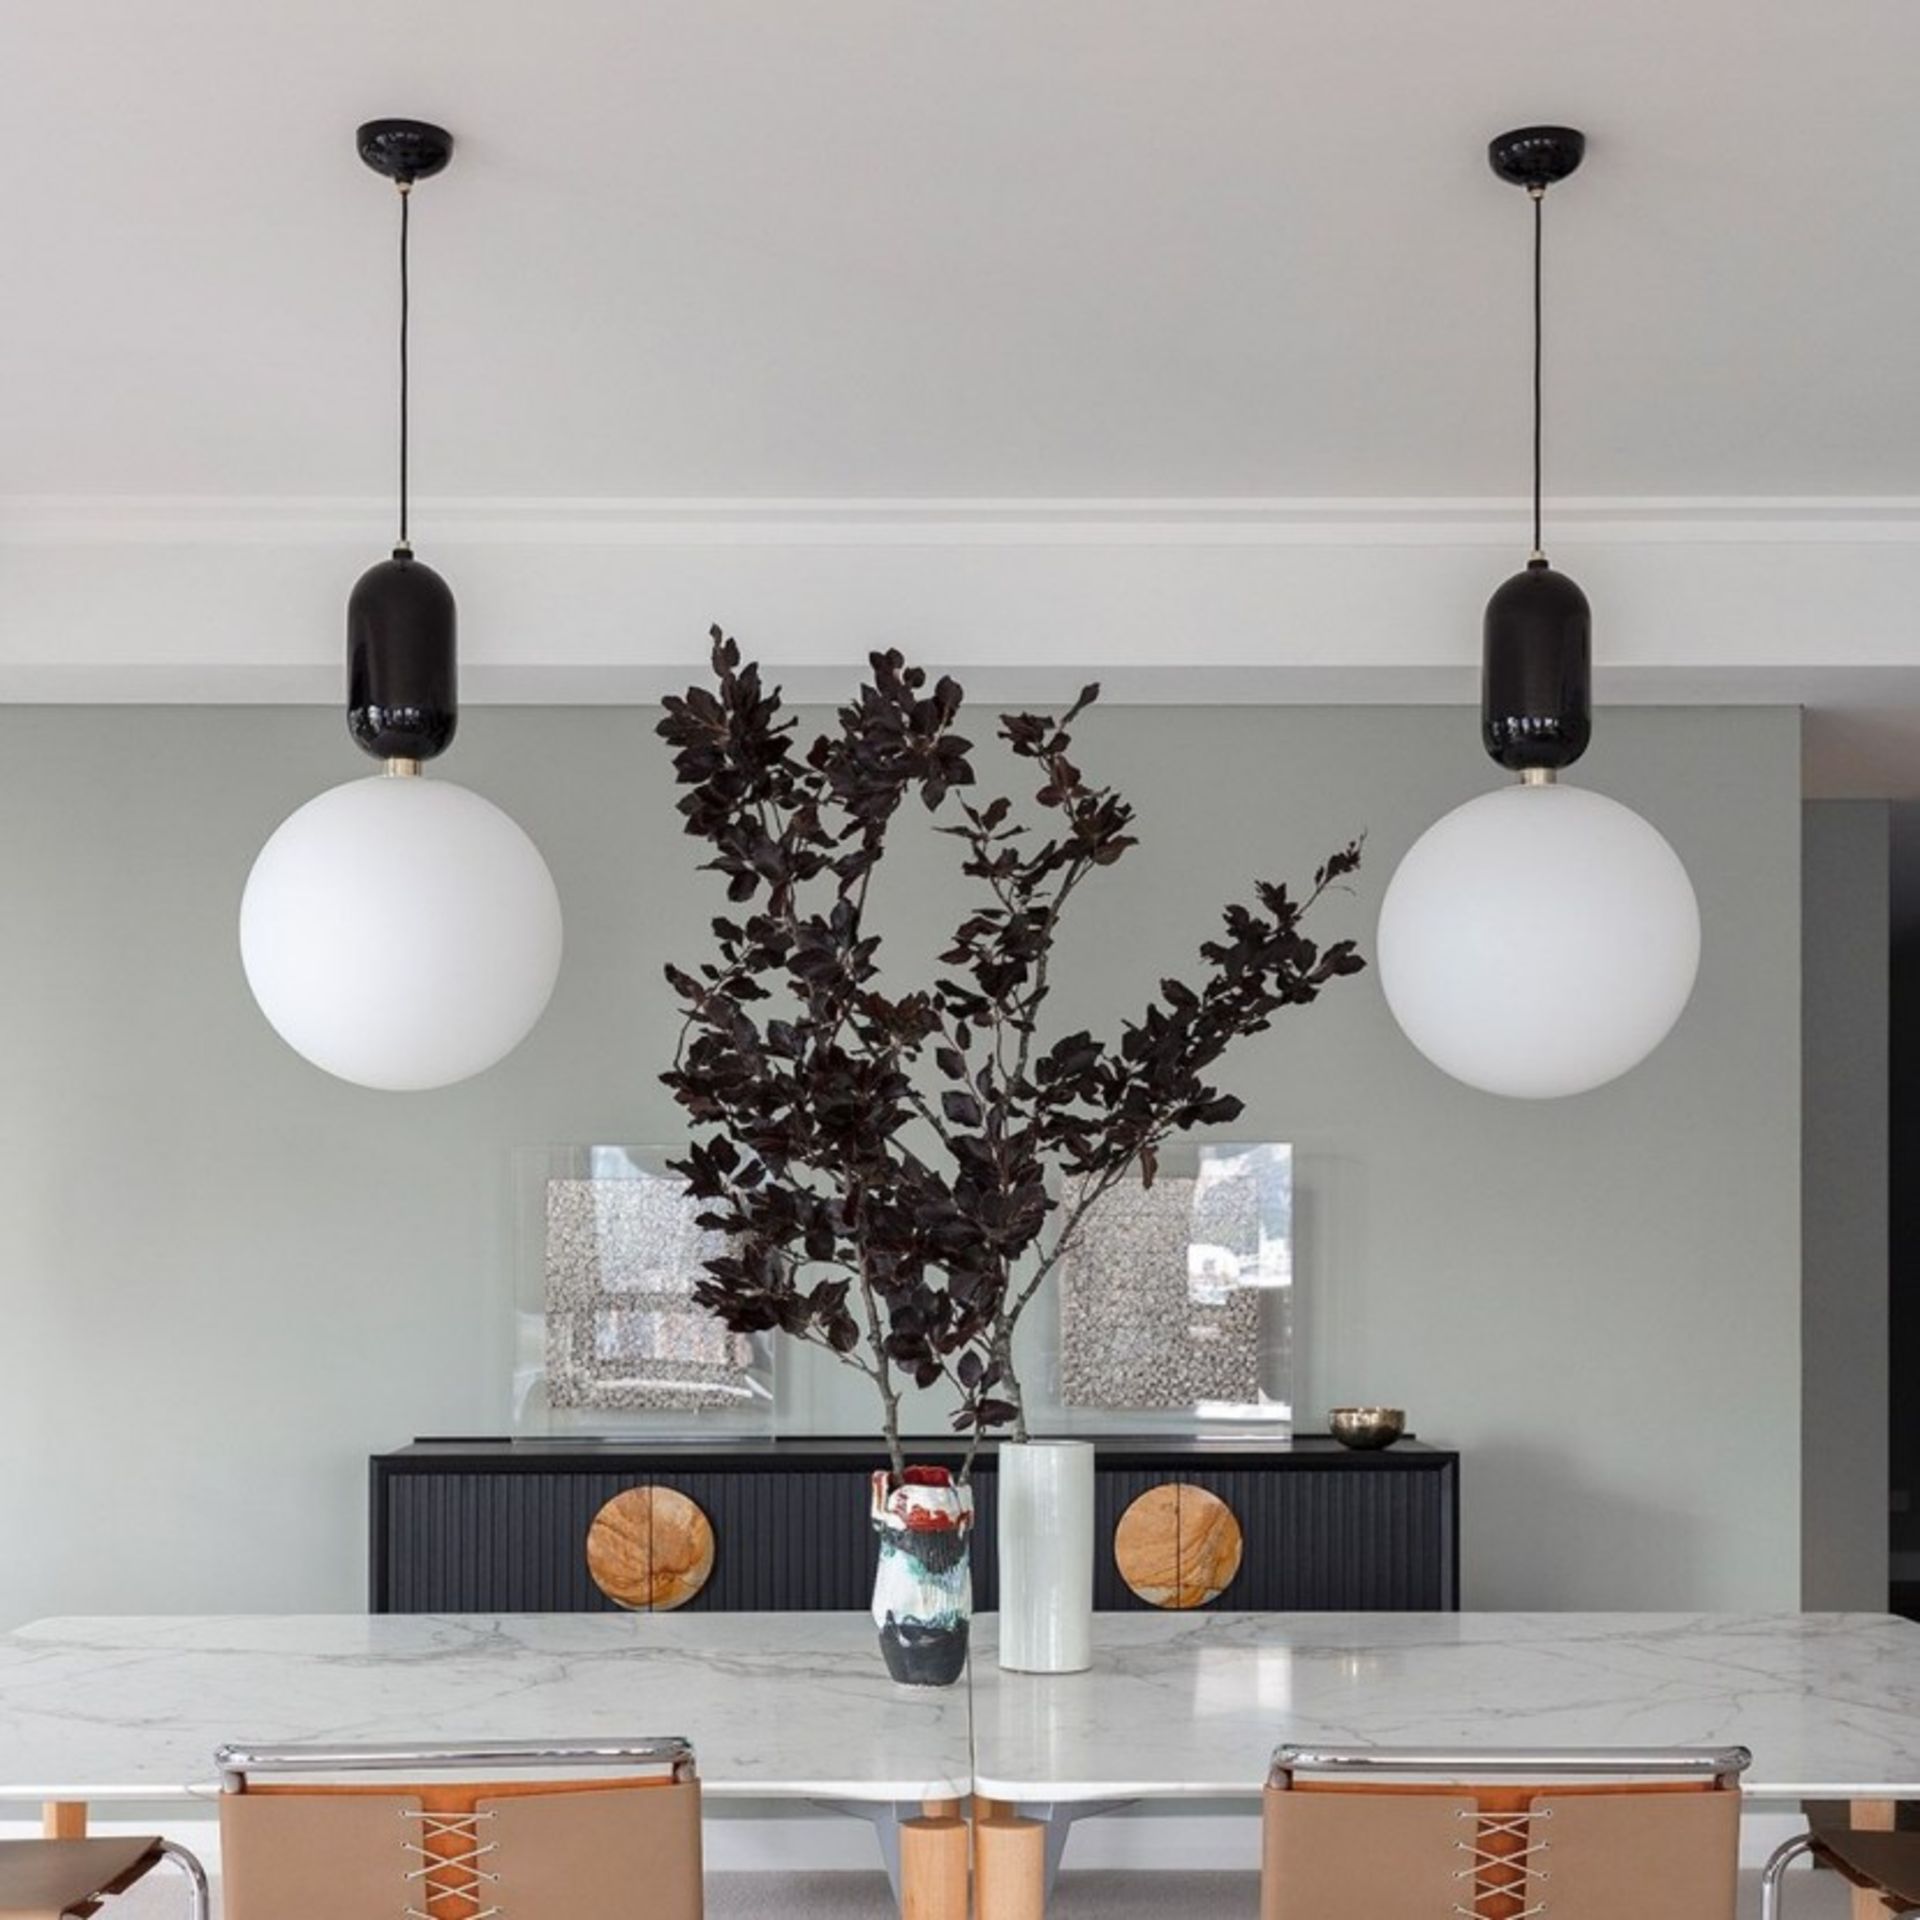 Palo pendant 30cm black a beautiful European style range, simple in its design with its stunning - Image 3 of 3